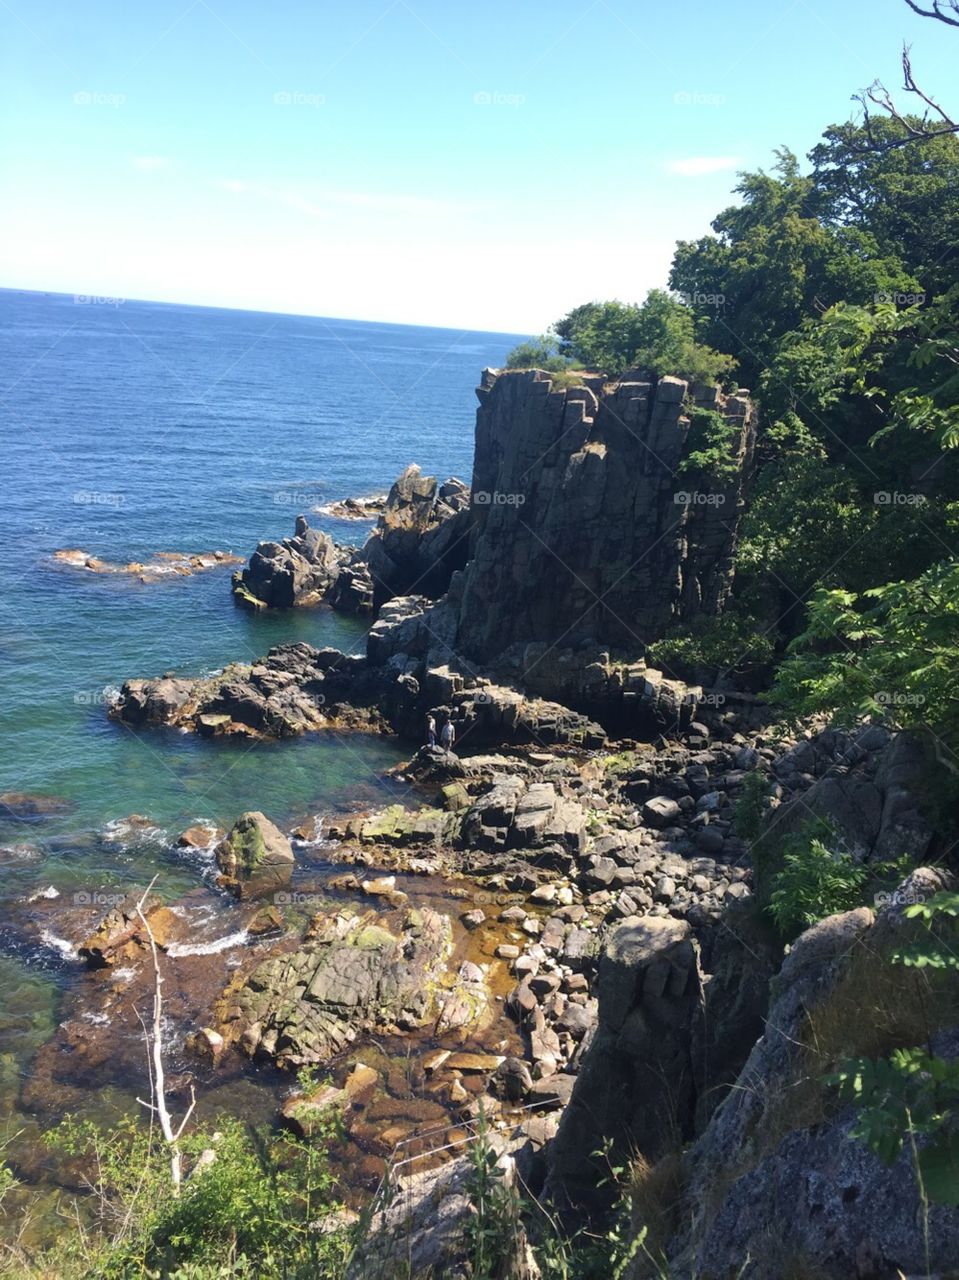 Rocky shore overlooking the blue, Baltic Sea off the island of Bornholm. Cliffs with trees tower over the beach. 